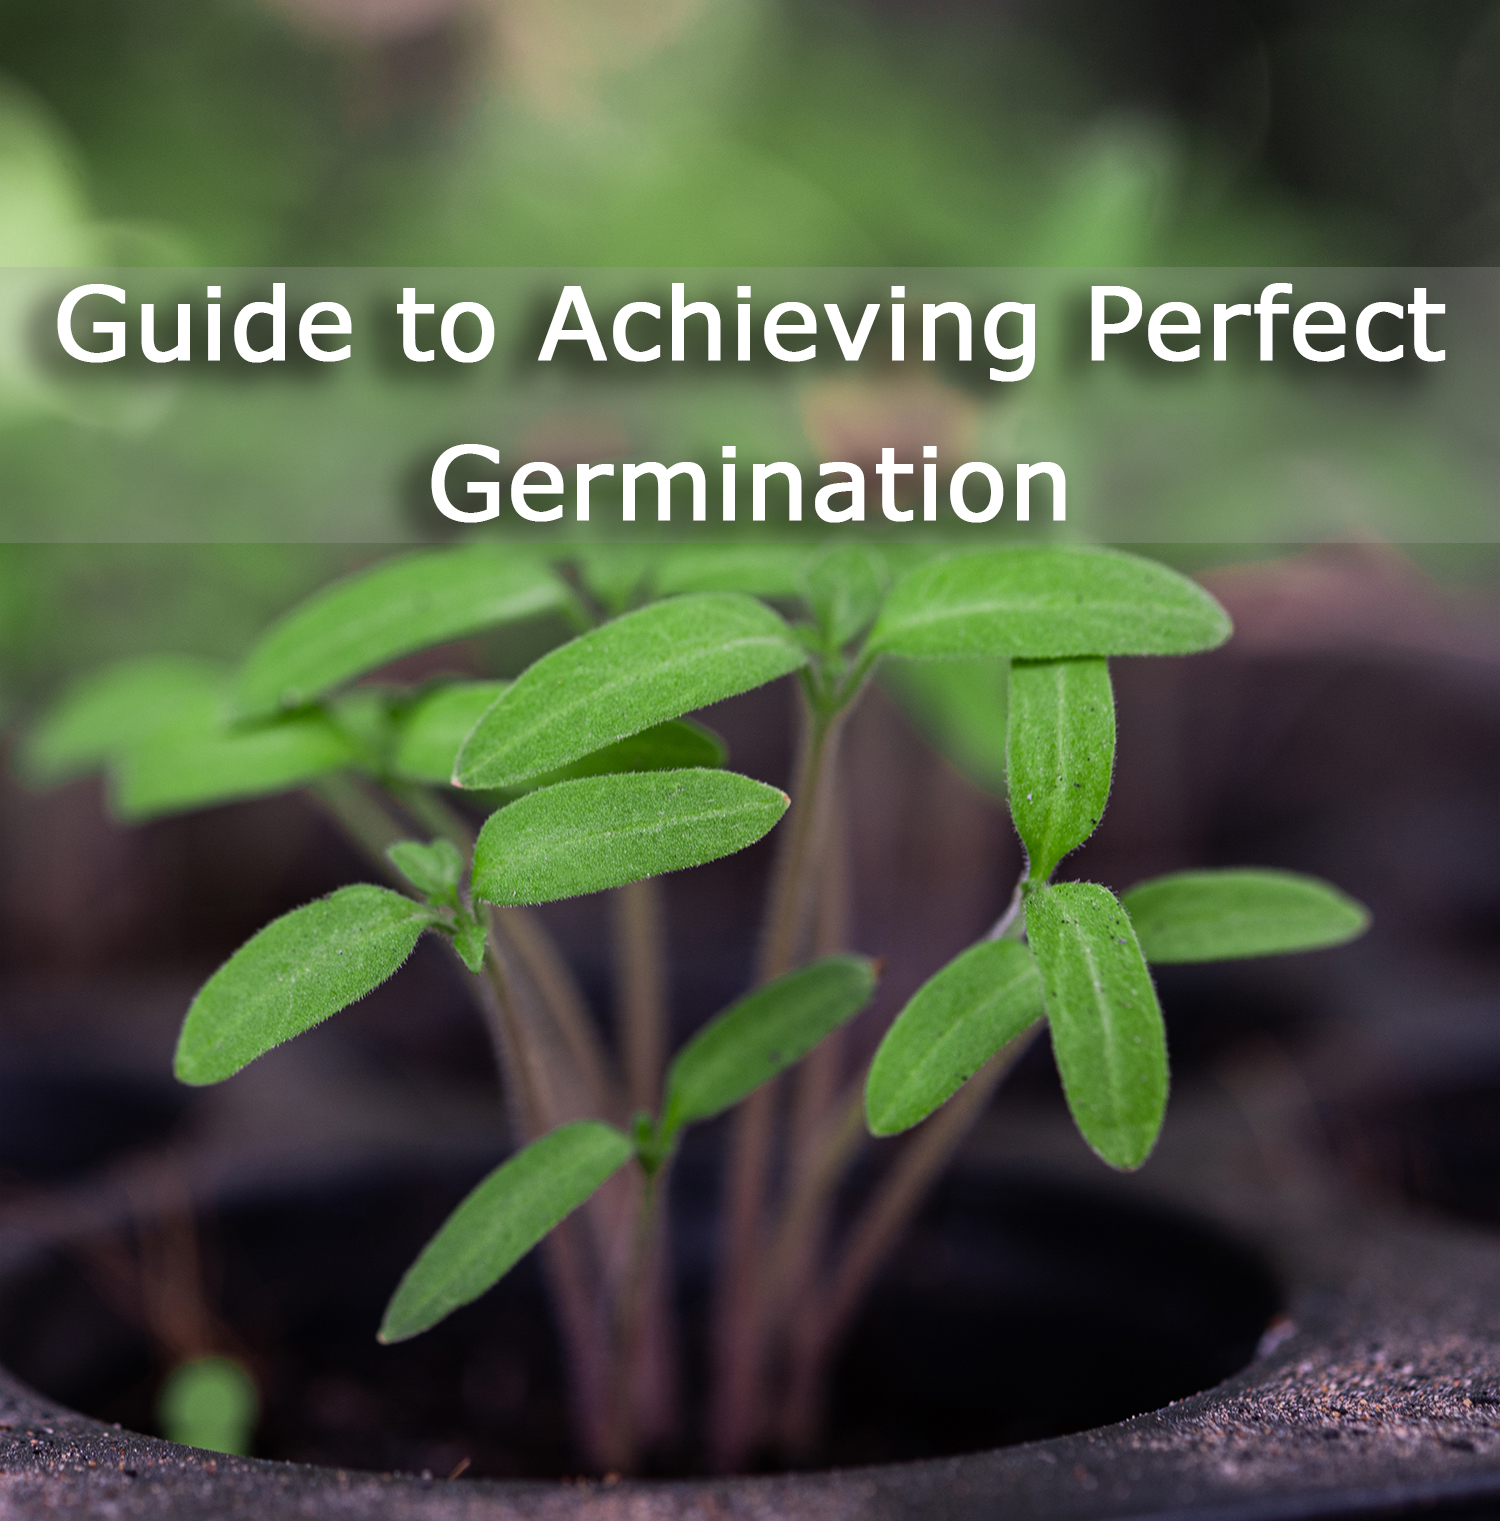 Guide-to-Achieving-Perfect-Germination